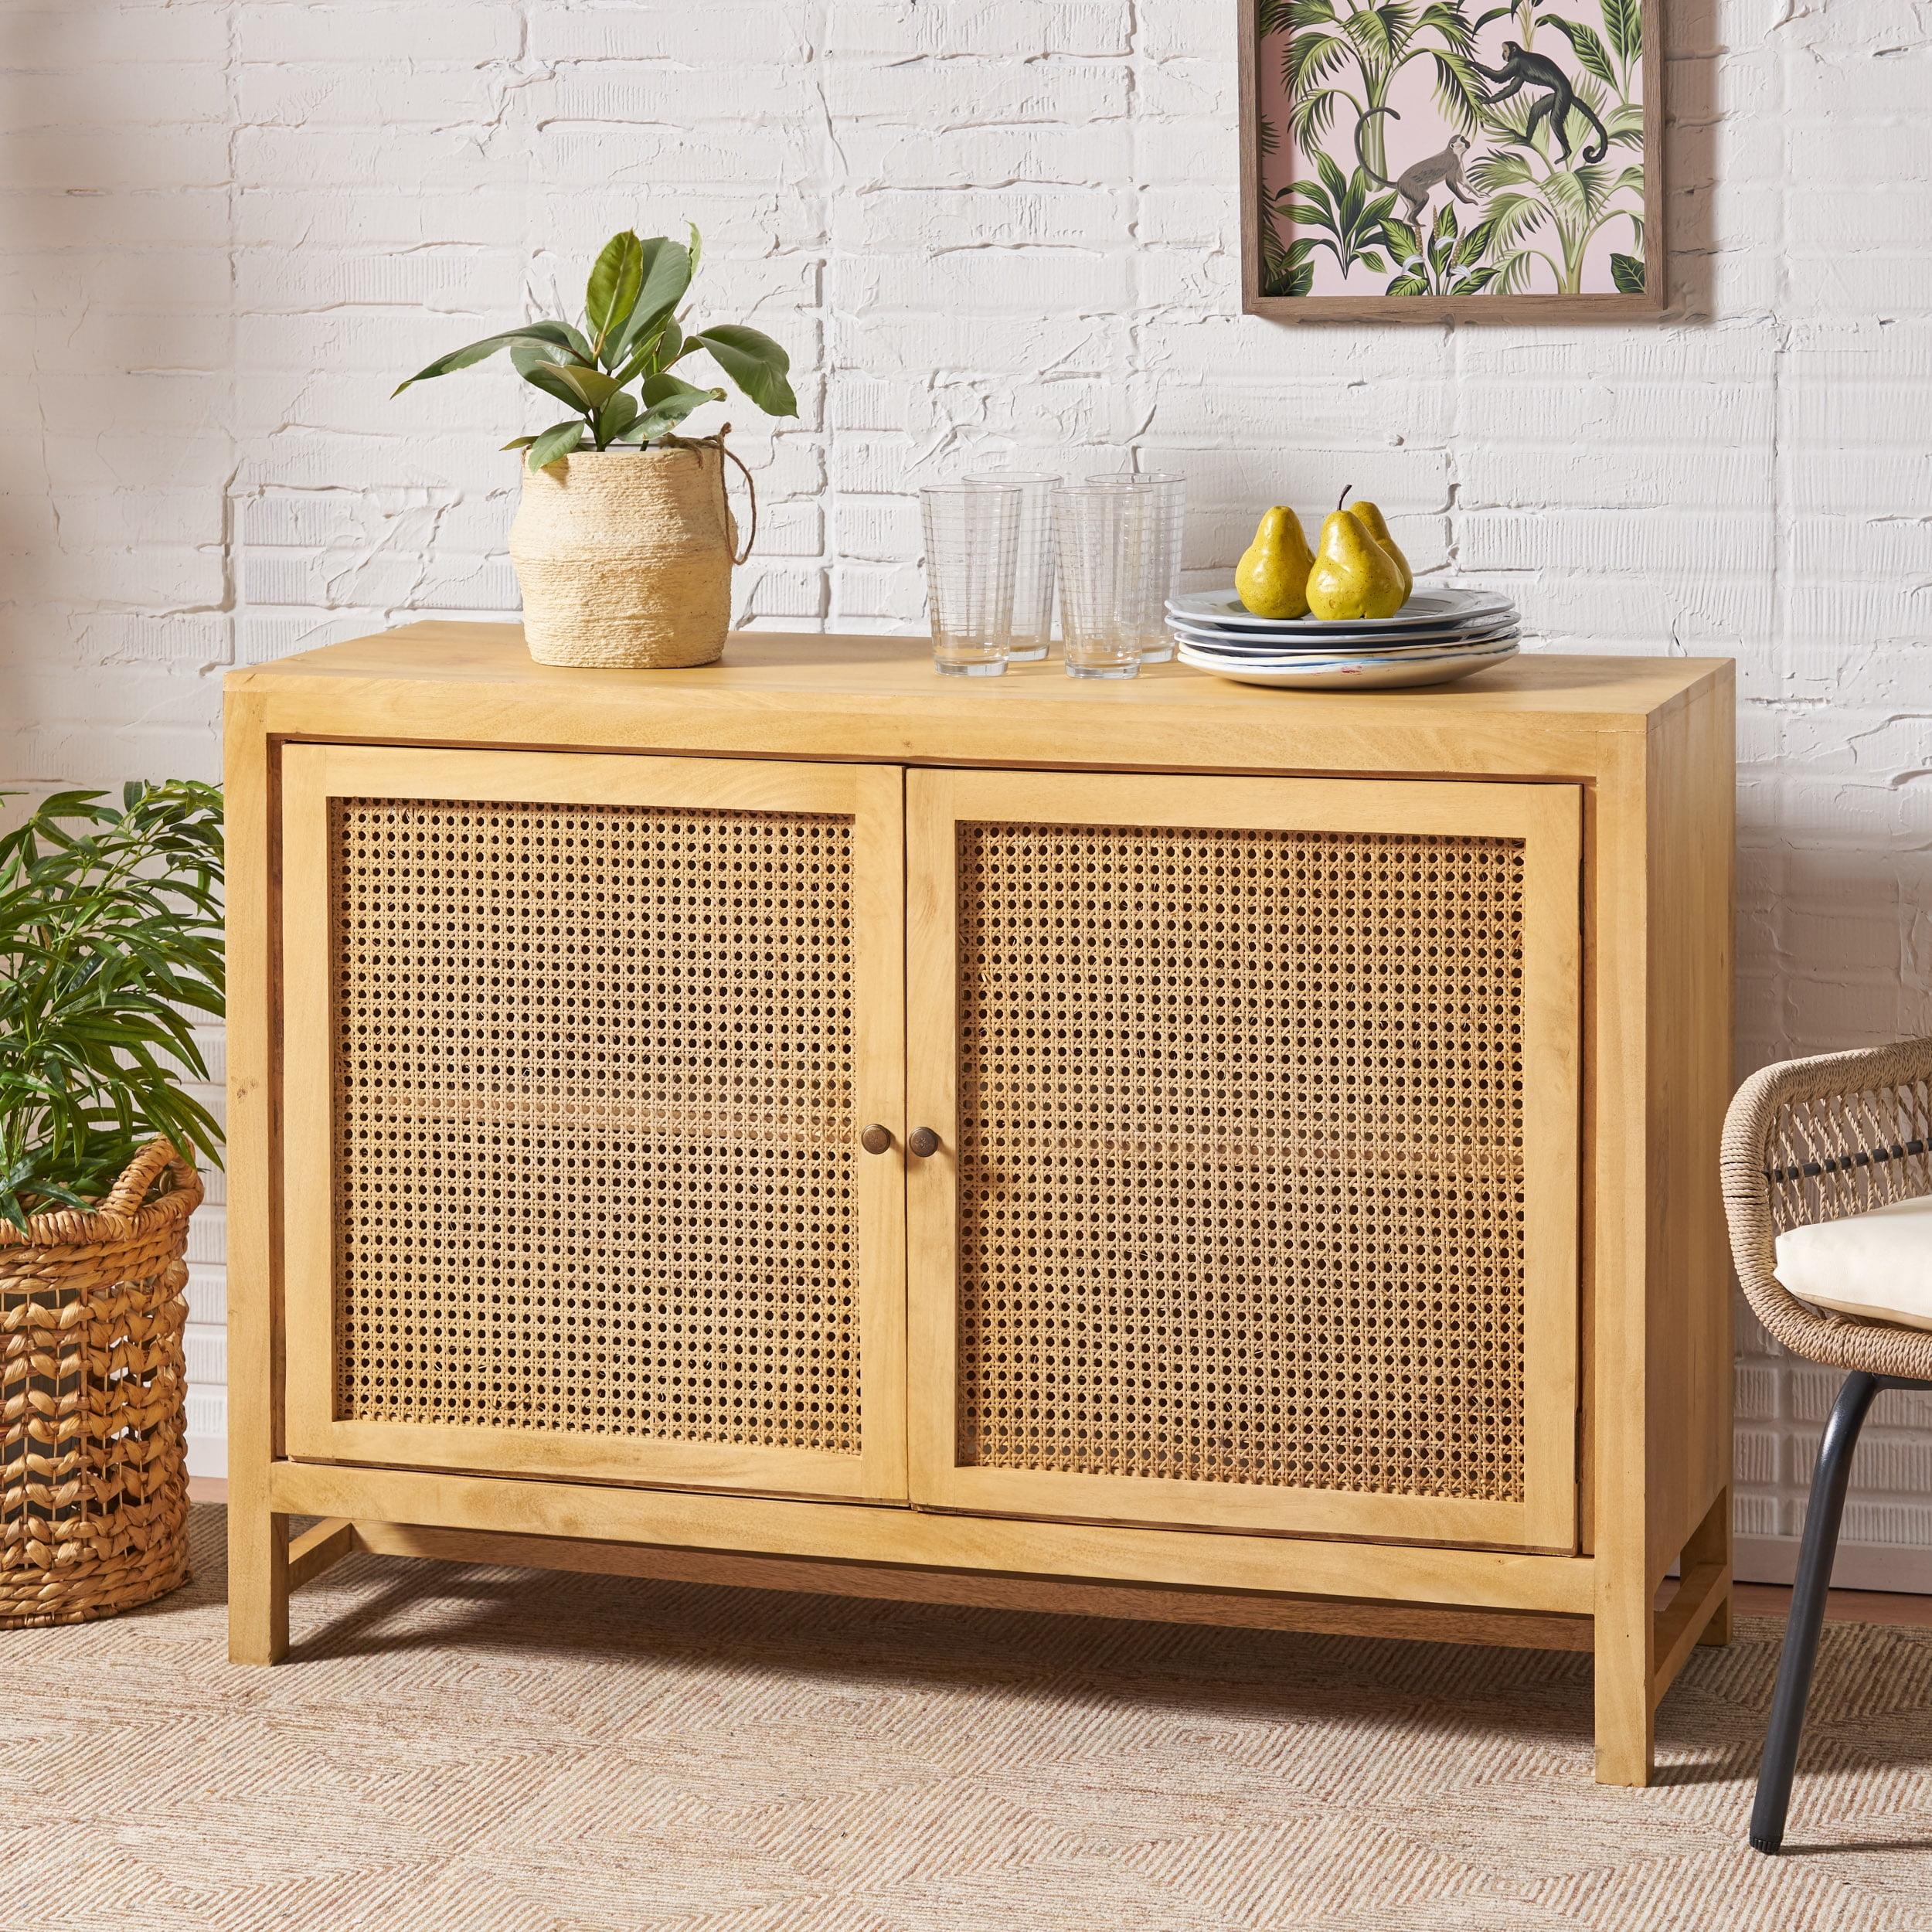 Boho Natural Brown Mango Wood Cabinet with Wicker Caning